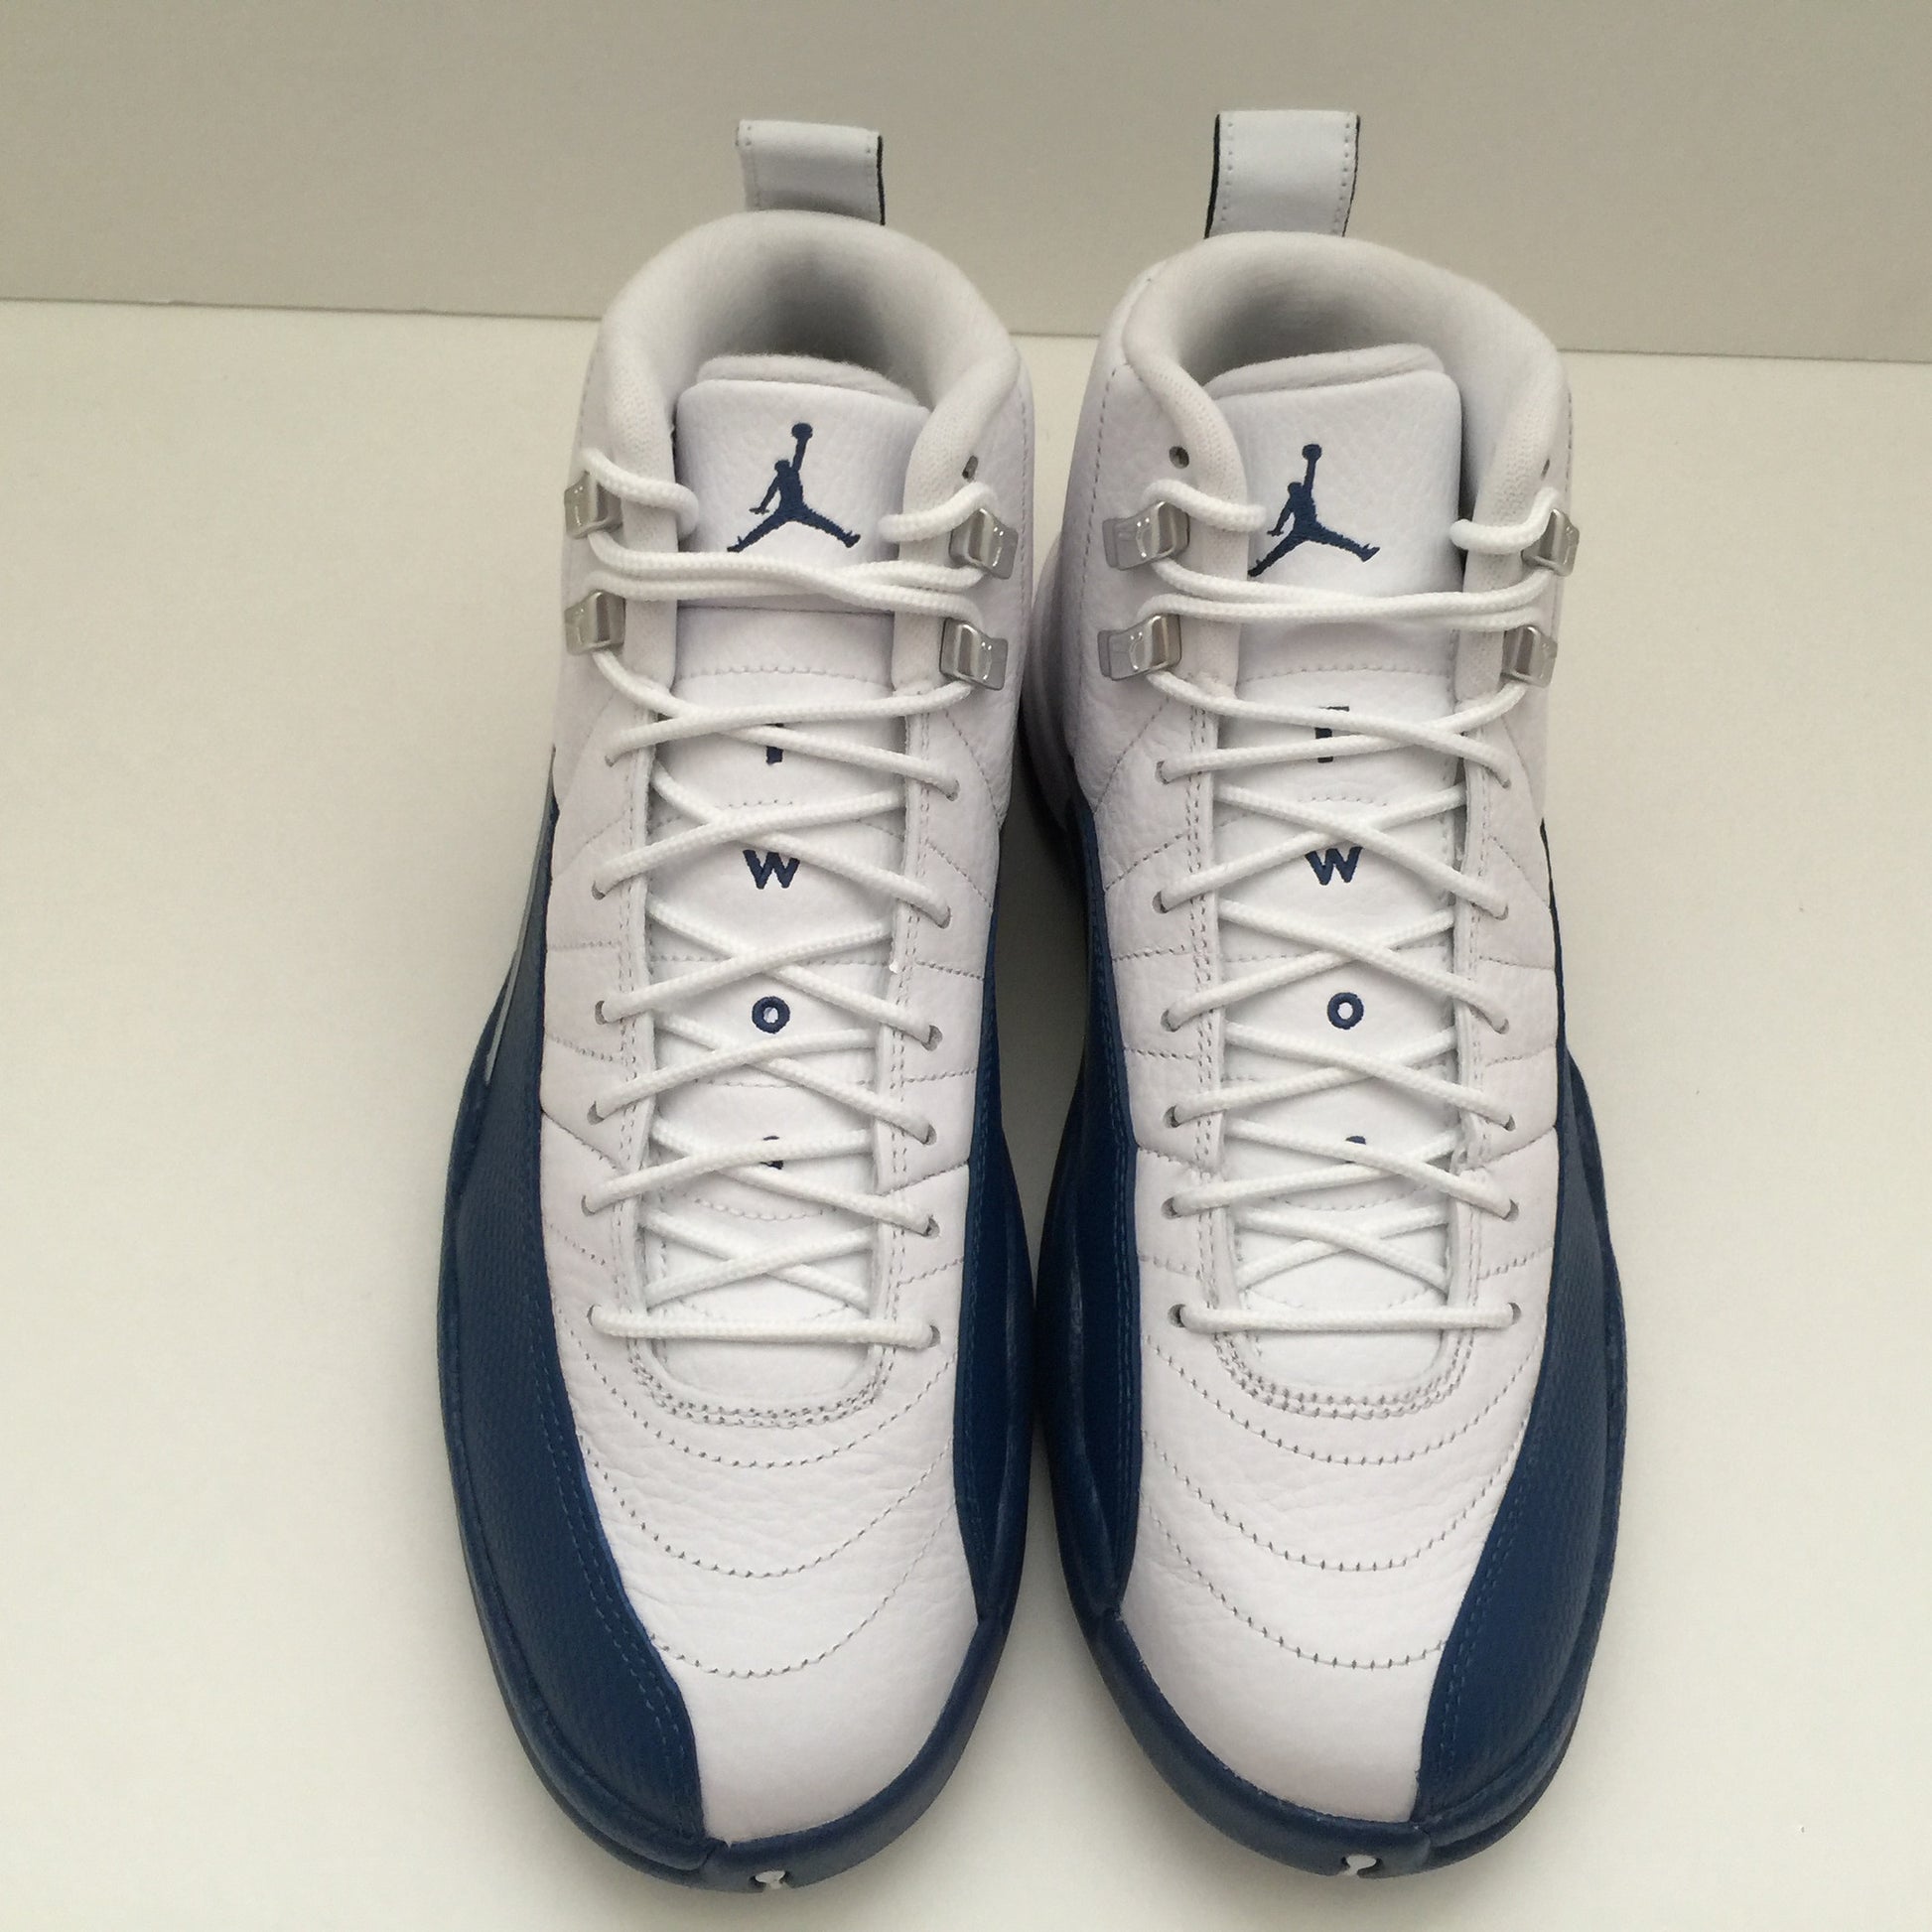 DS Nike Air Jordan 12 XII French Blue Size 8/Size 8.5/Size 10/Size 10.5 - DOPEFOOT
 - 2